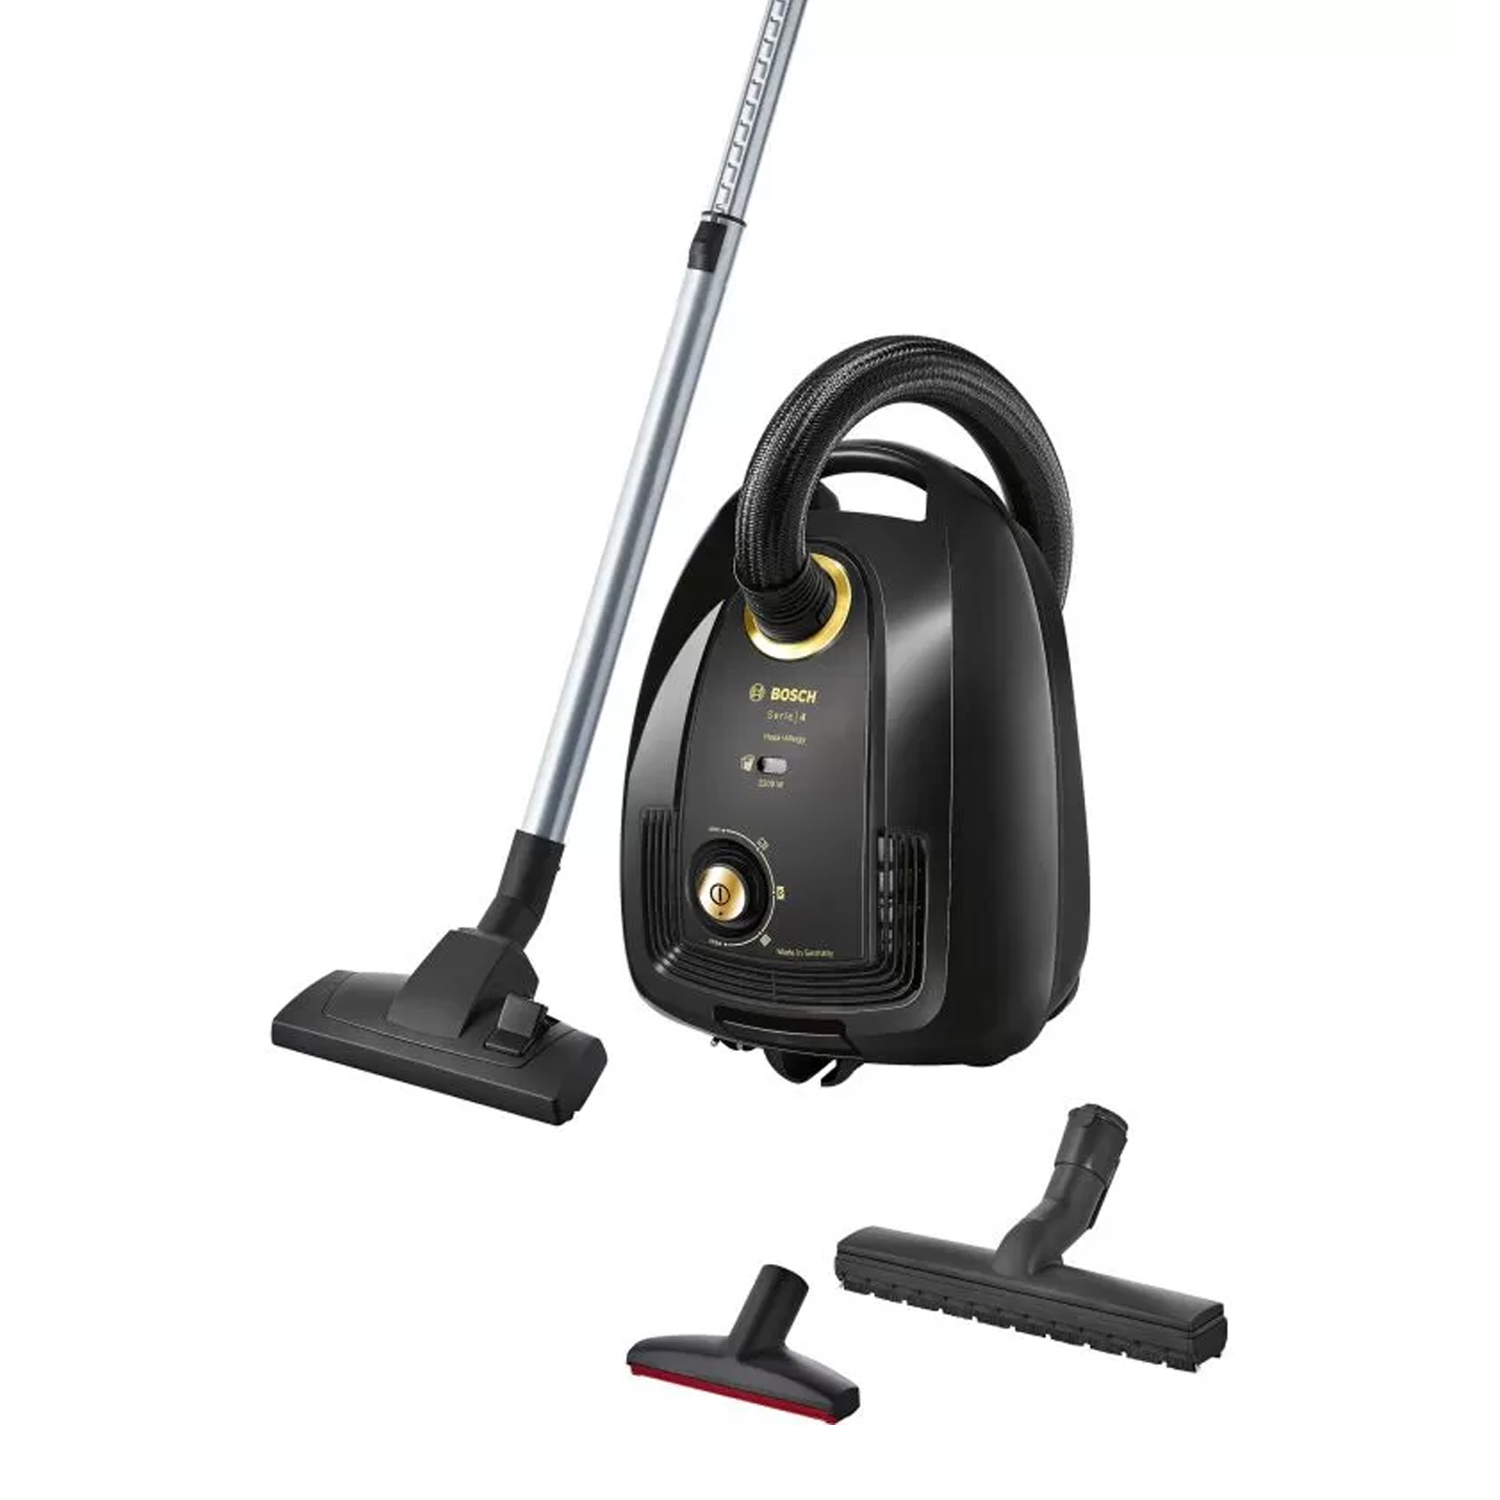 https://www.aghezty.com/en/products/Vacuum---Steam-Cleaners/HOOVER-Vacuum-Cleaner2000-WattRed-White-TMI20030201345/uploads/product/2021-03-28/1616936277262.jpg